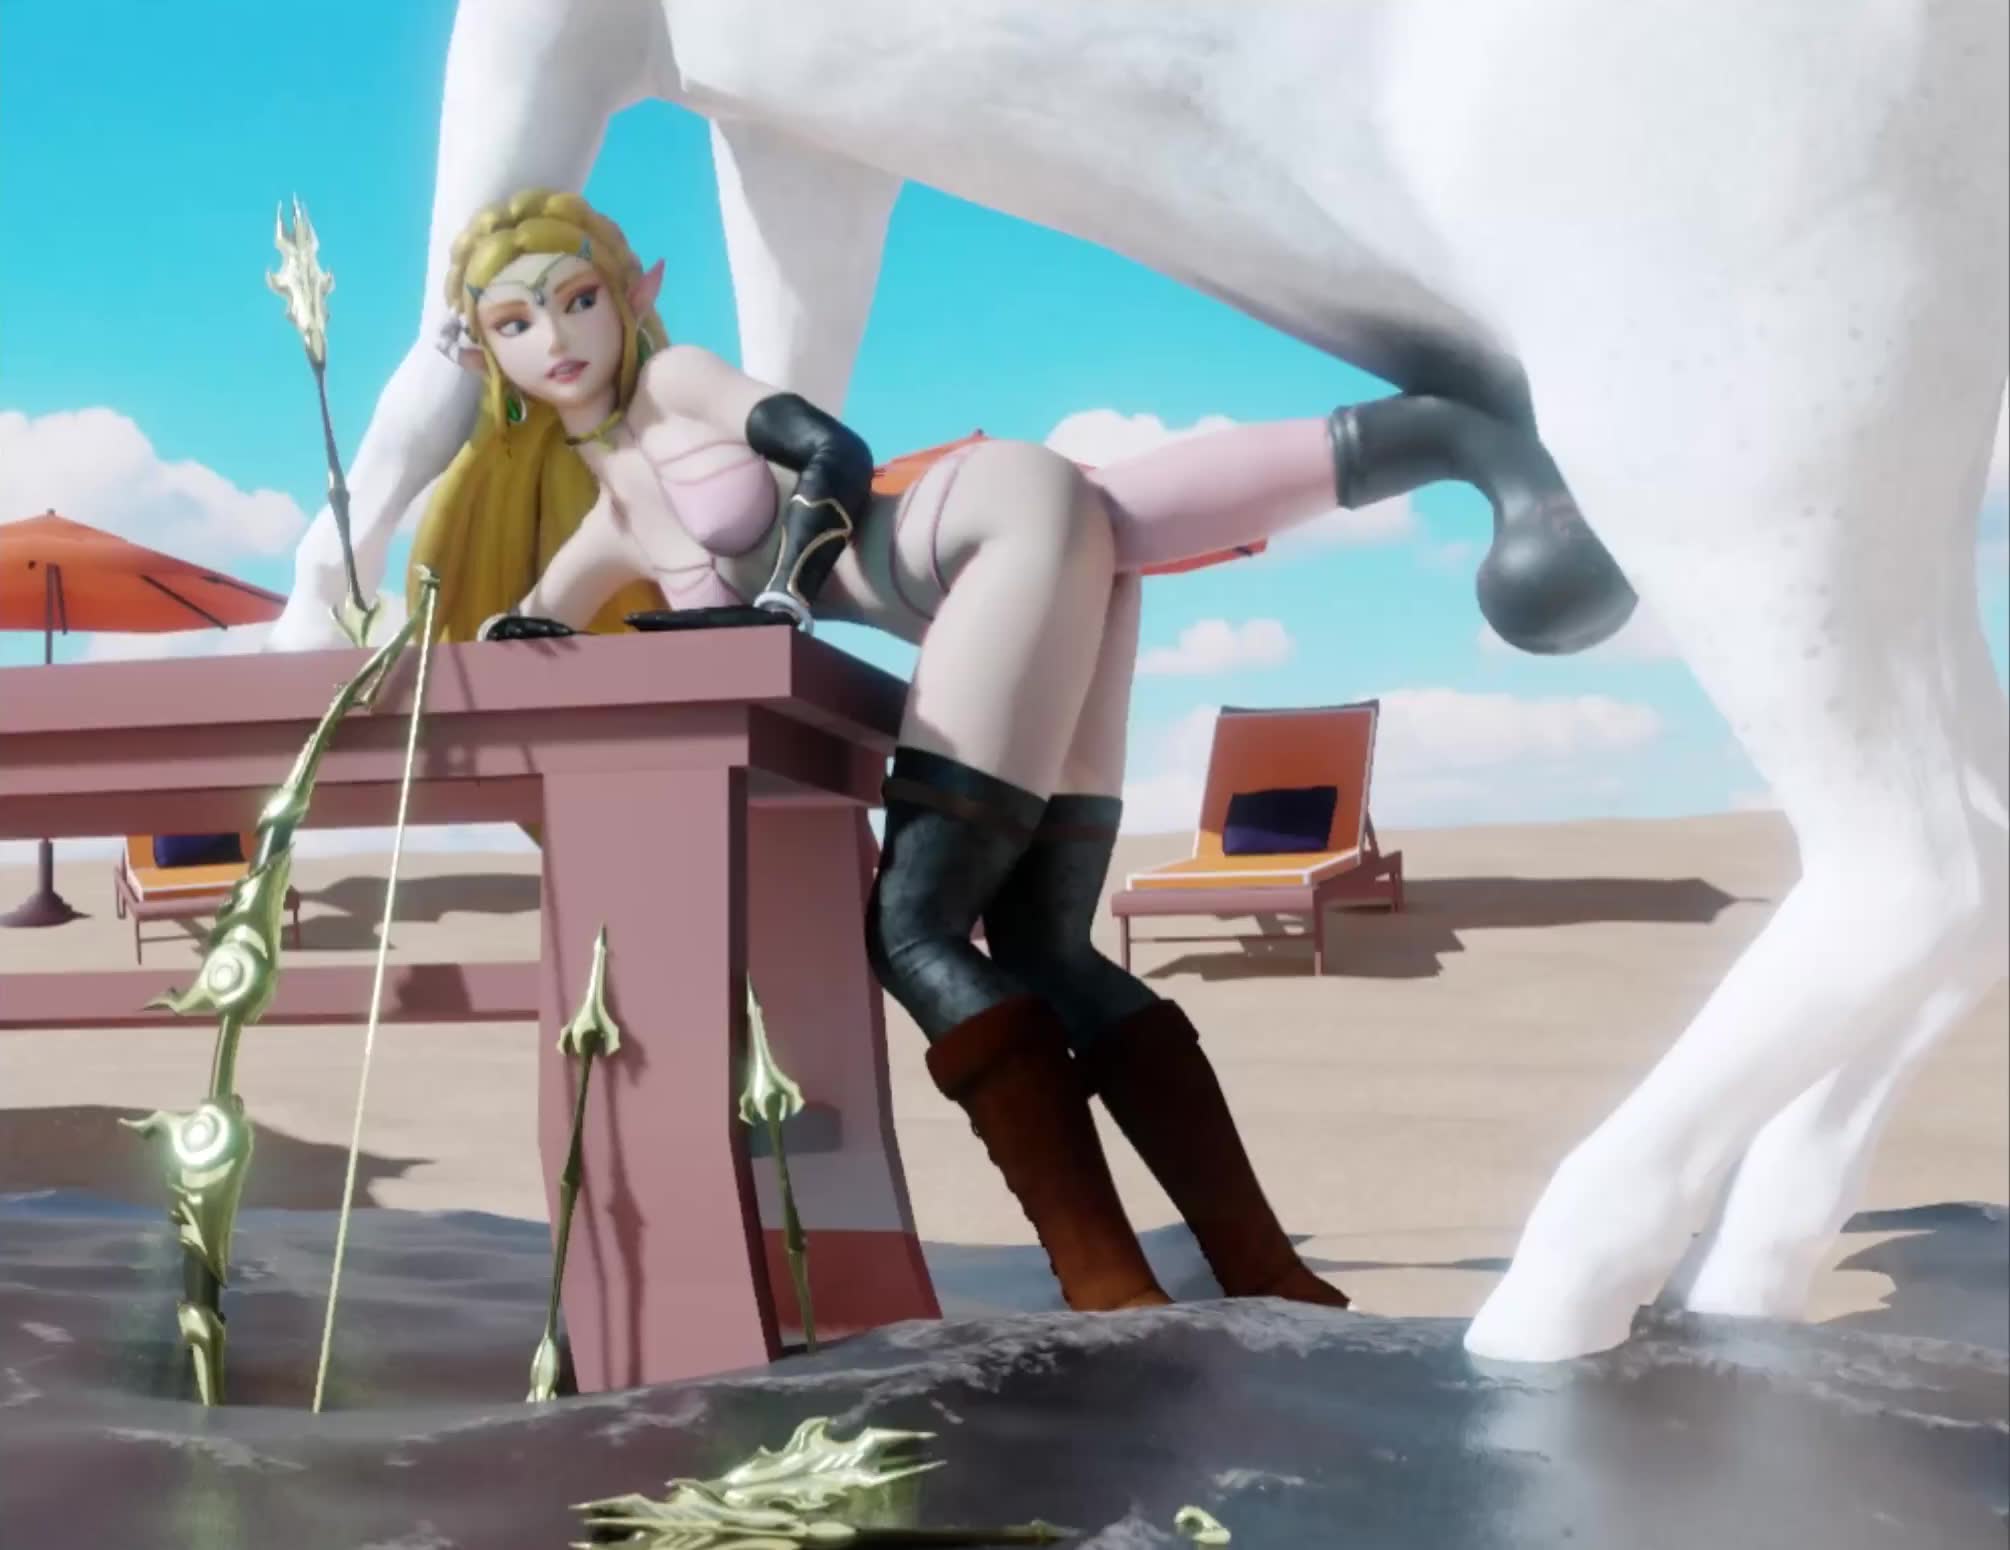 Princess Zelda Gets Horse Huge Cock From Behind In Ass – The Legend Of Zelda NSFW animation thumbnail